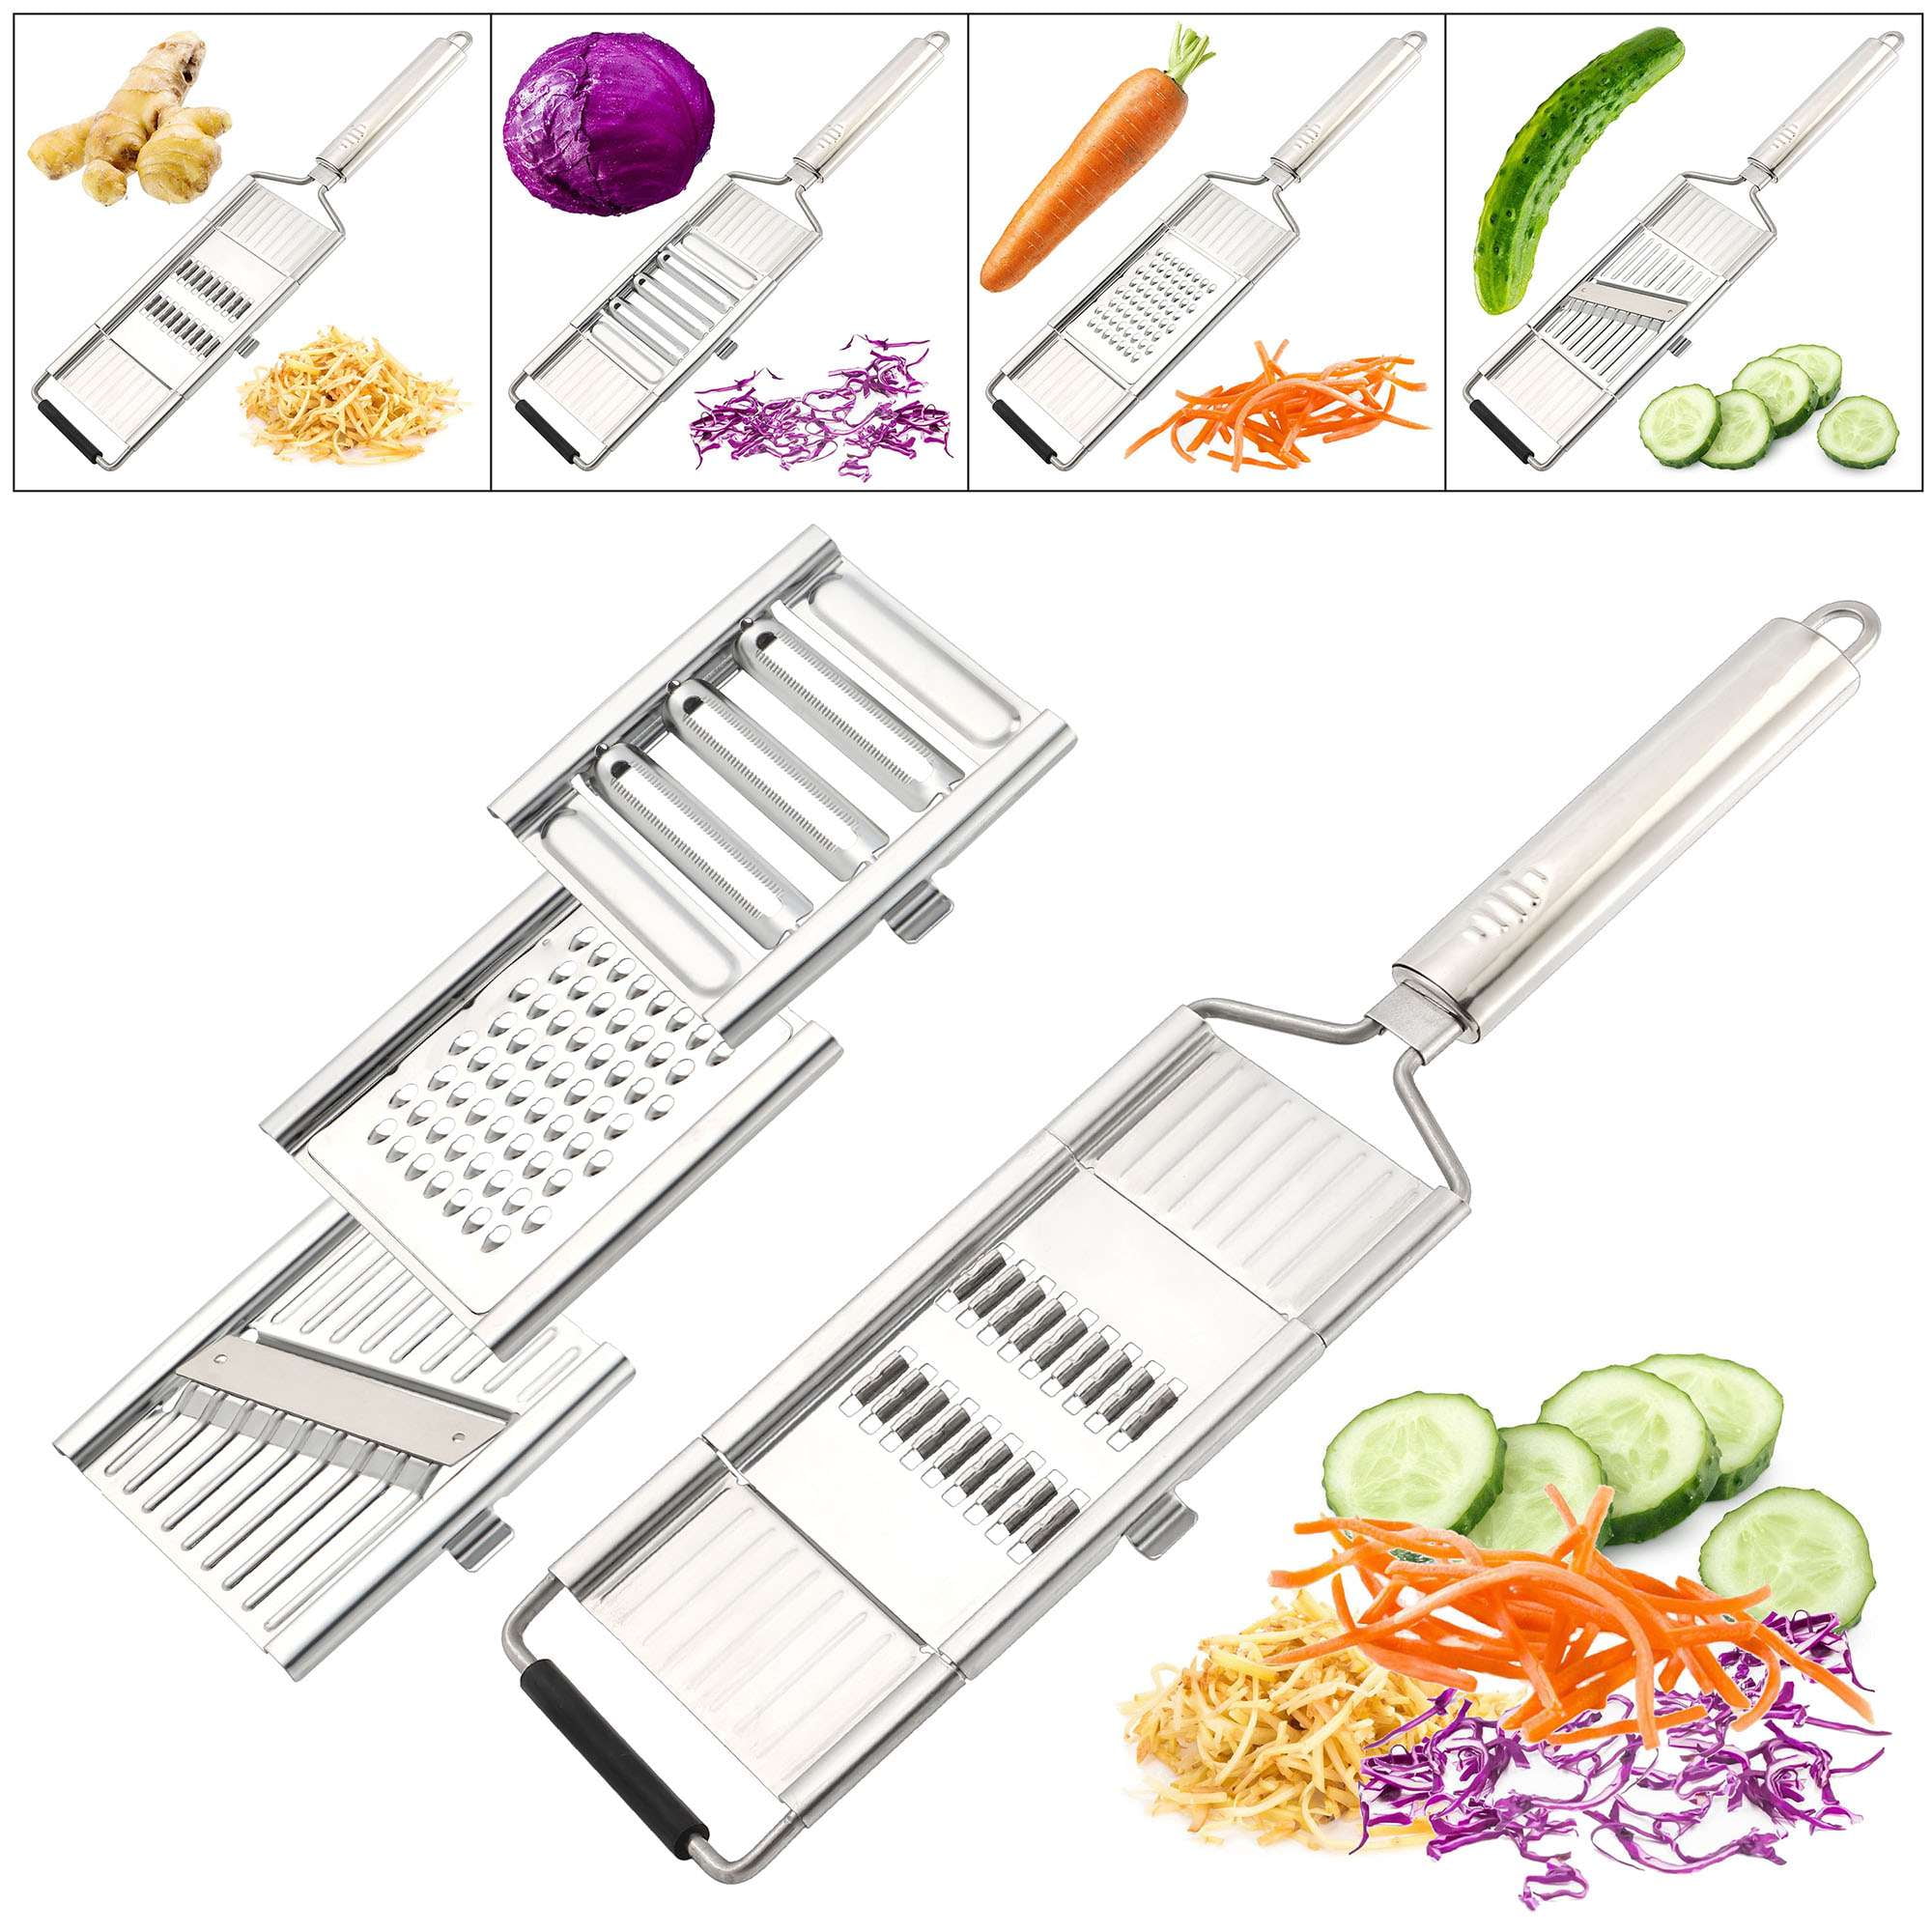 Suuker Multi-Purpose Vegetable Slicer Set,Stainless Steel Cheese Grater & Vegetable Chopper with 4 Adjustable Blades for Vegetables, Fruits,hand-held